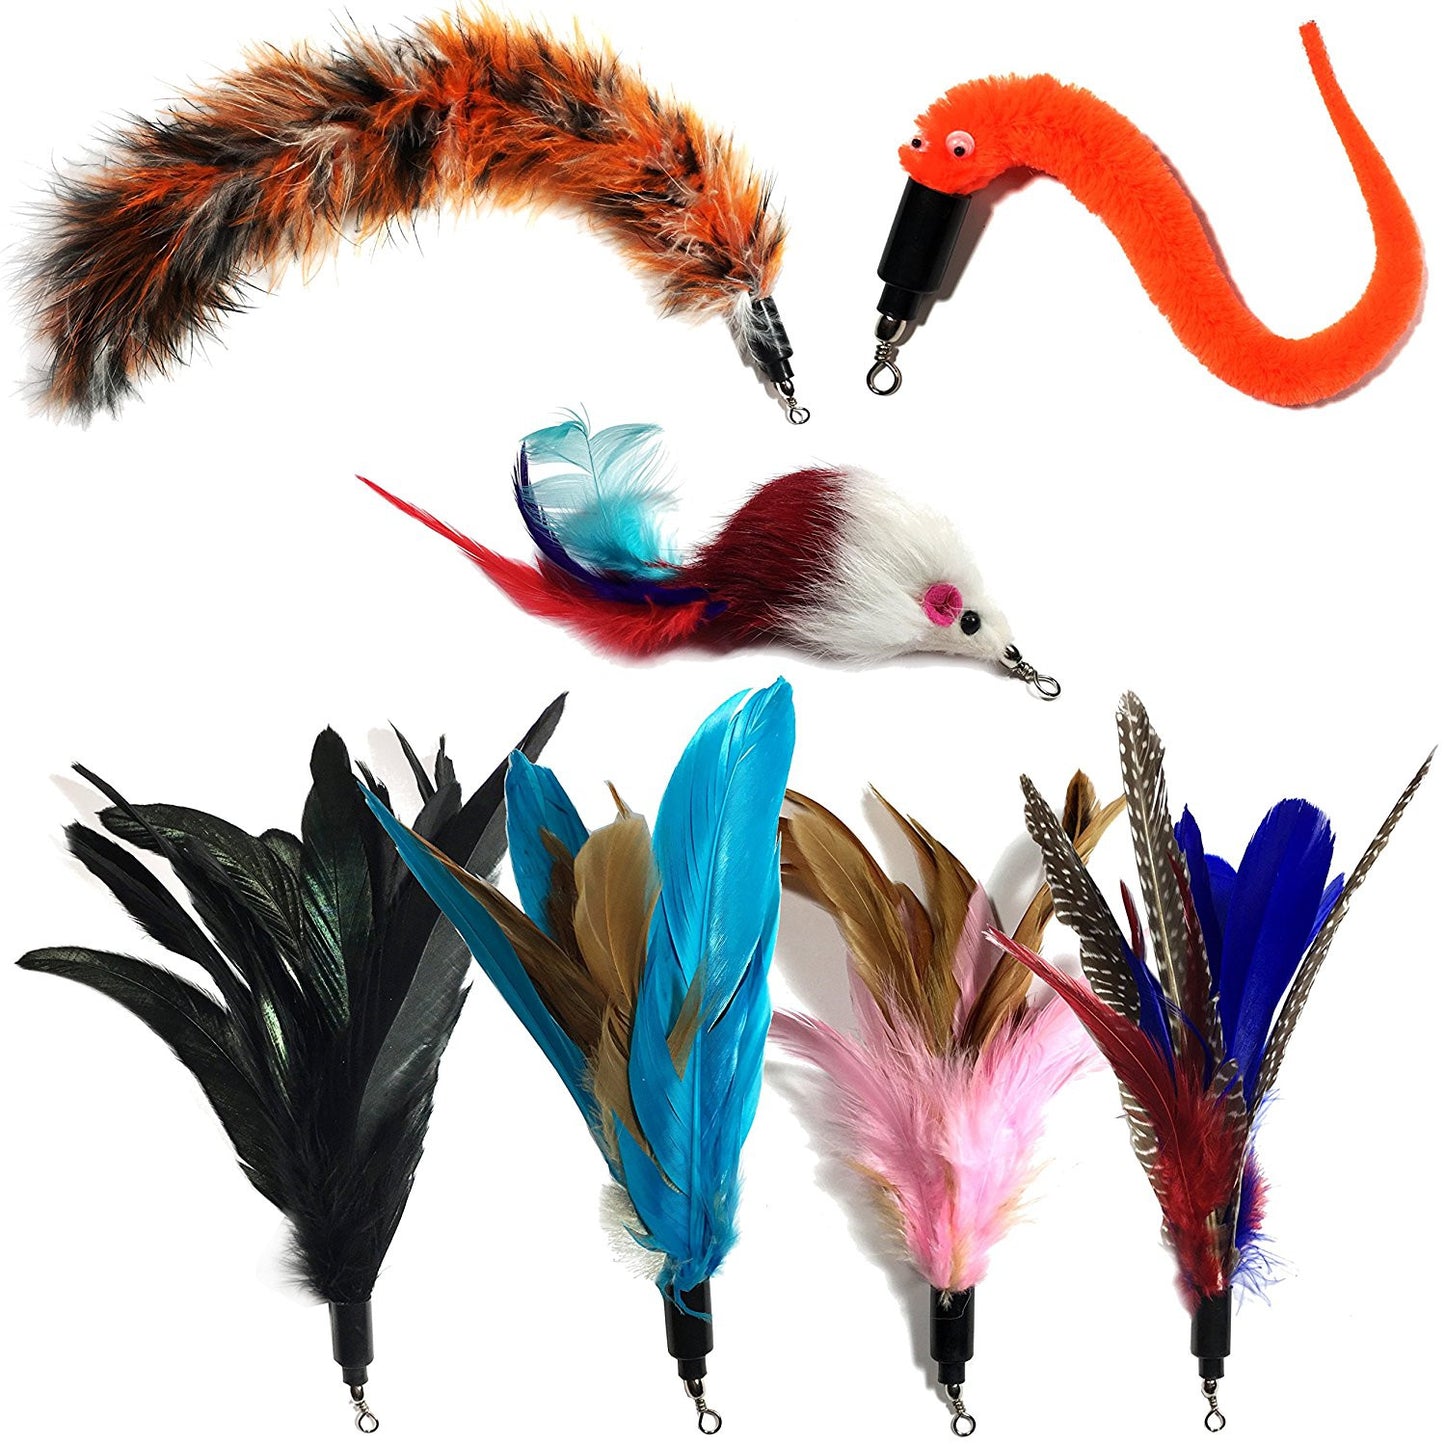 Cat Wand Attachments - 4 Feathers, 1 Mouse, 1 Worm